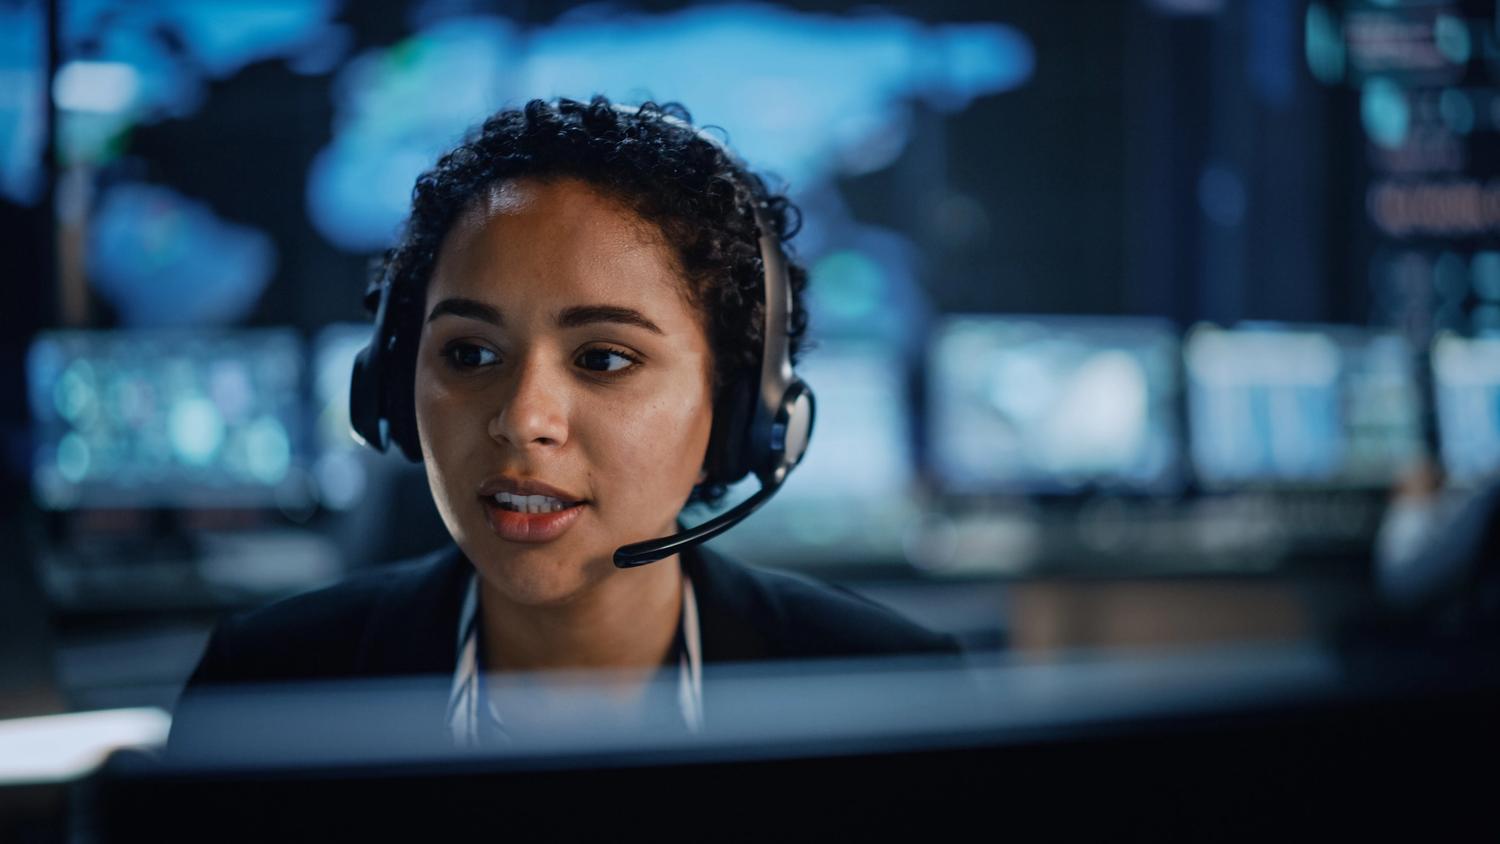 female security surveillance employee with headset